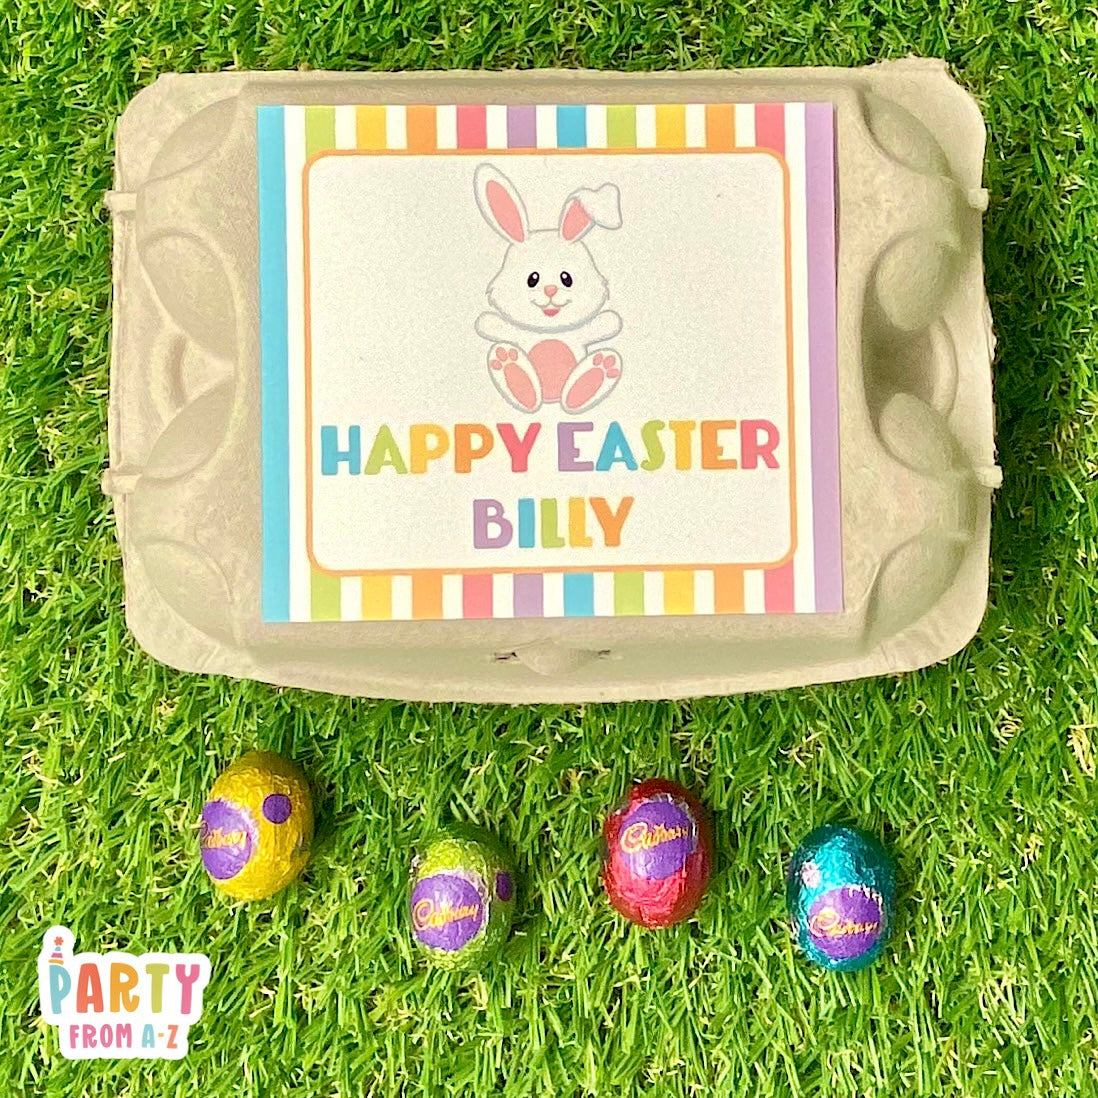 Personalised Easter Egg Cartons